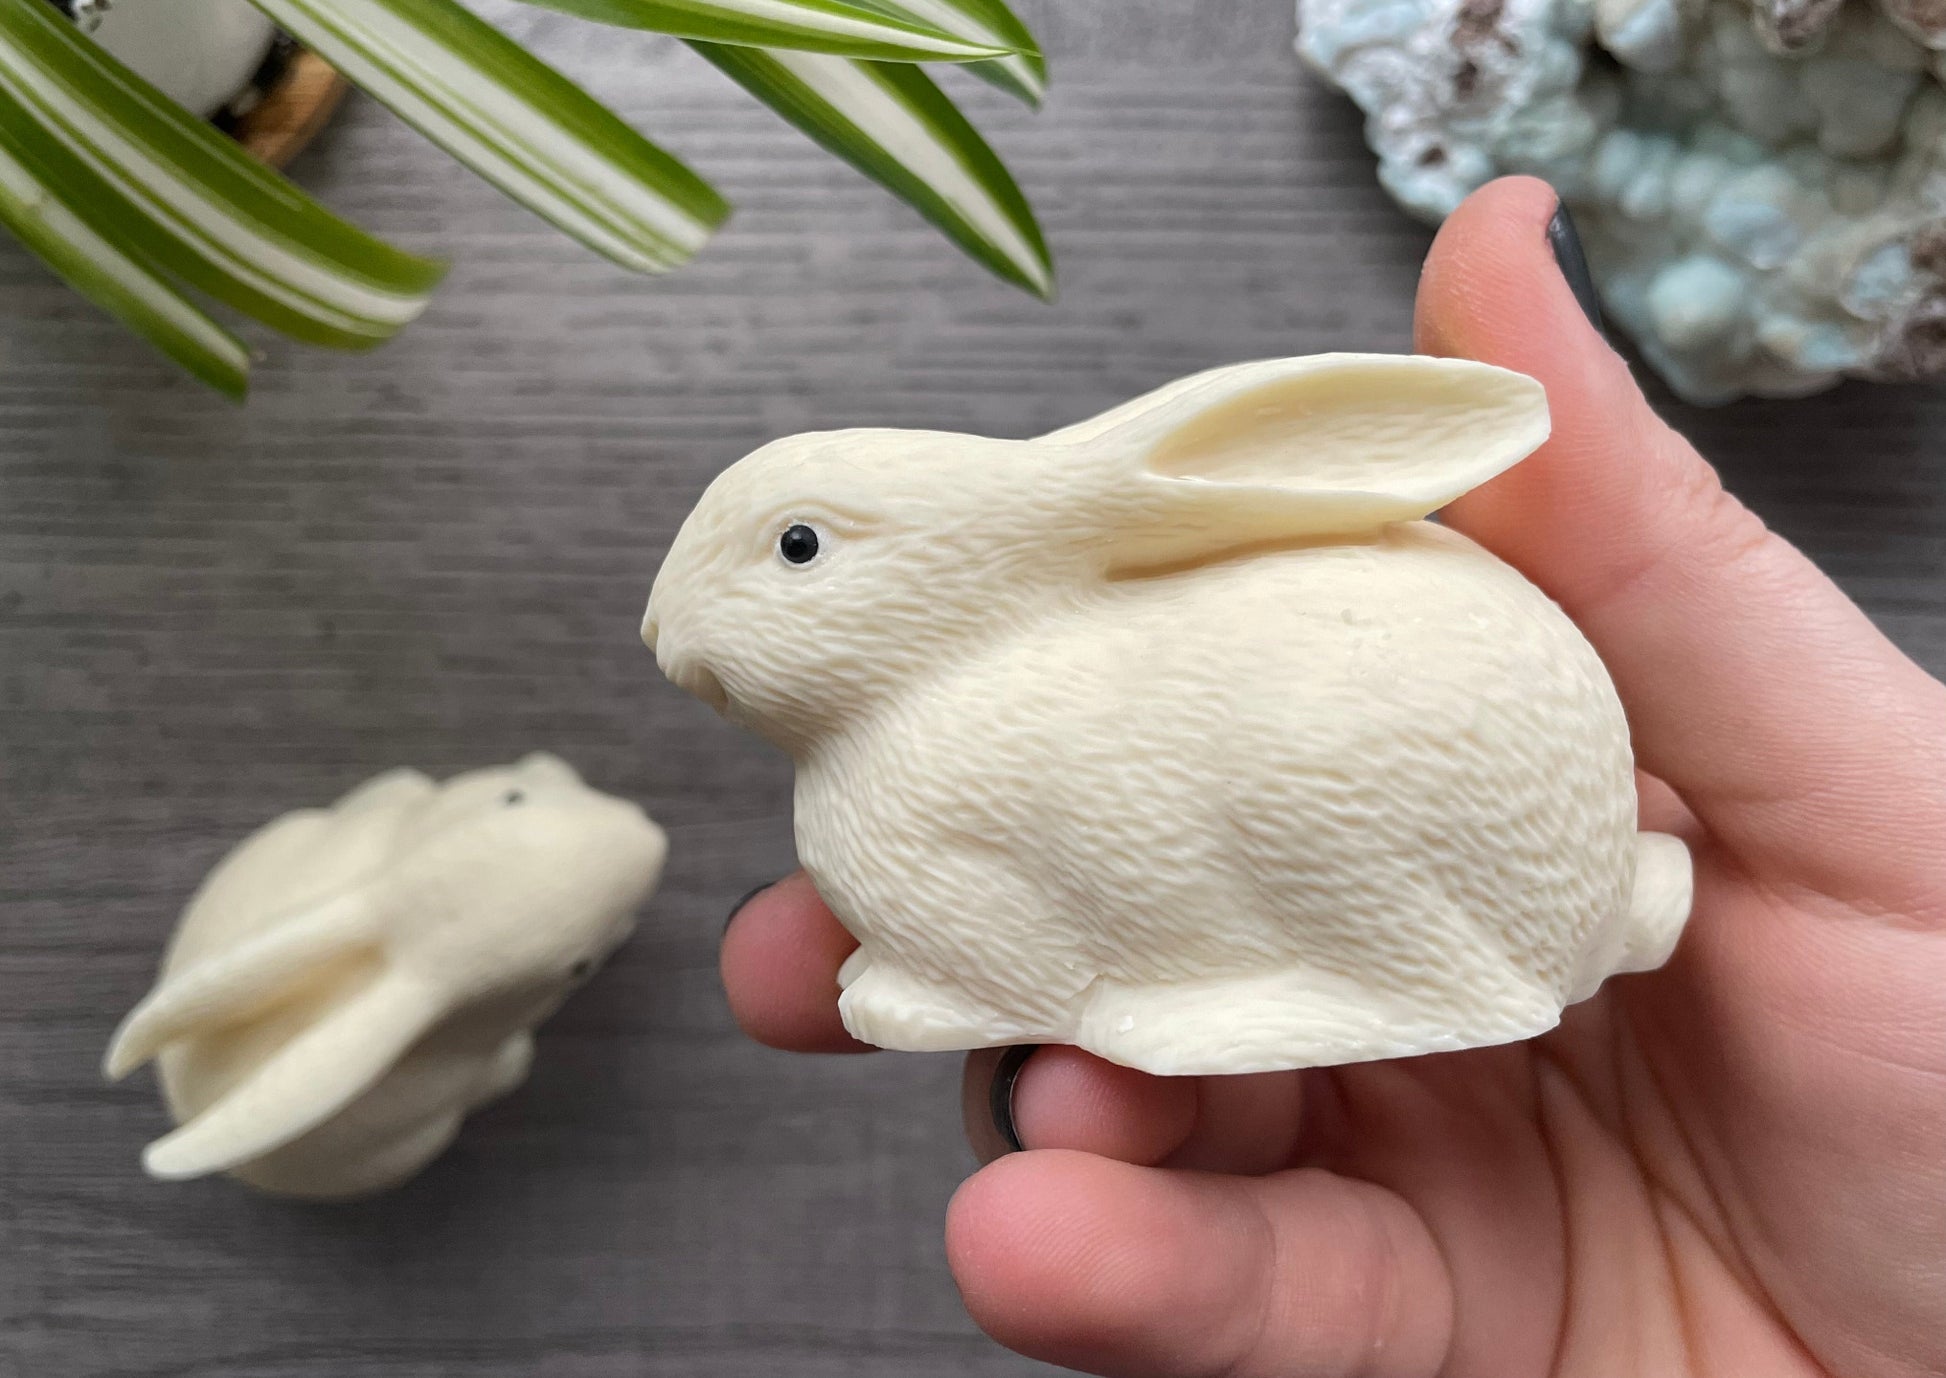 Pictured is a rabbit carved out of tagua nut.